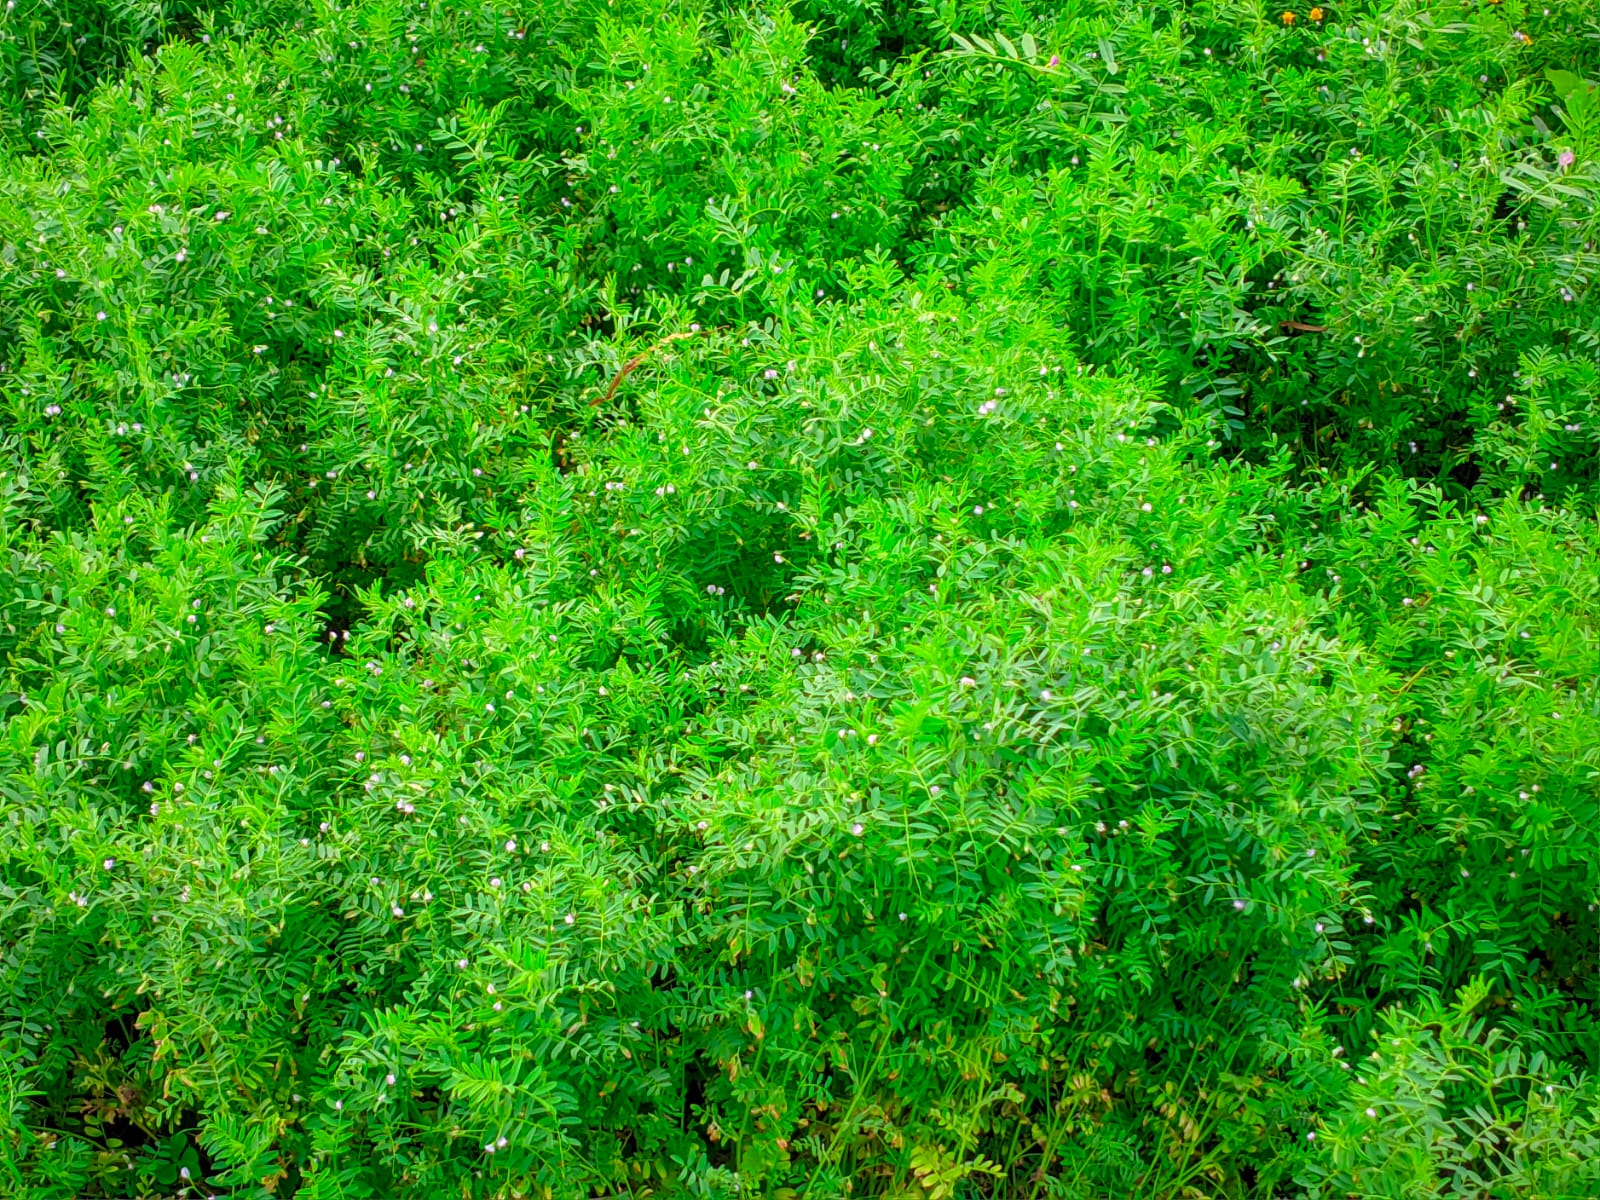 Green bush with lots of green leaves.